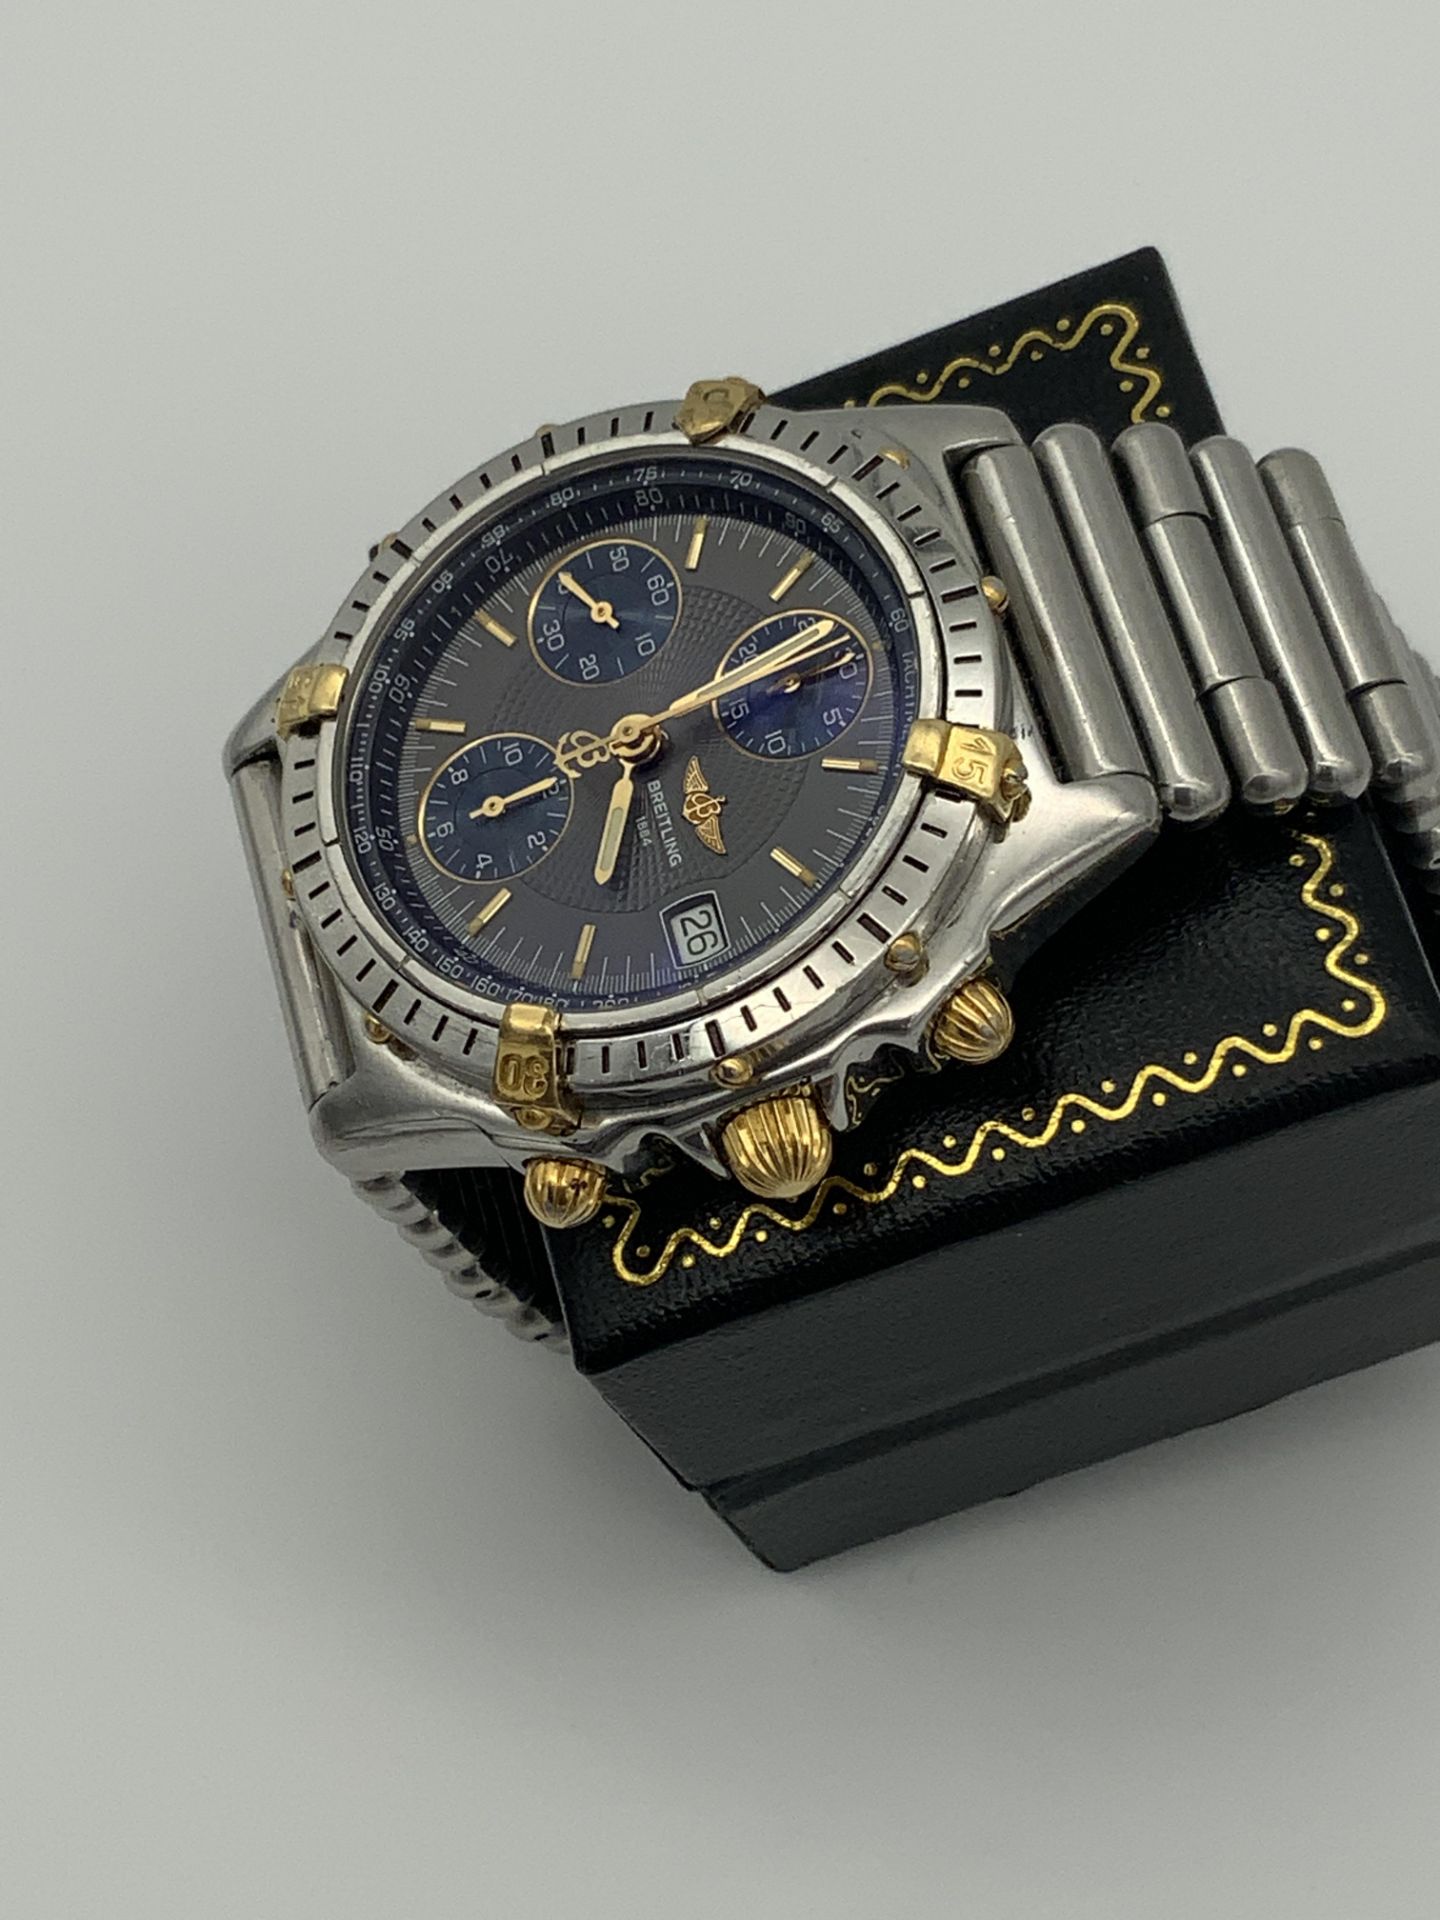 BREITLING CHRONOGRAPH WATCH - Image 5 of 6